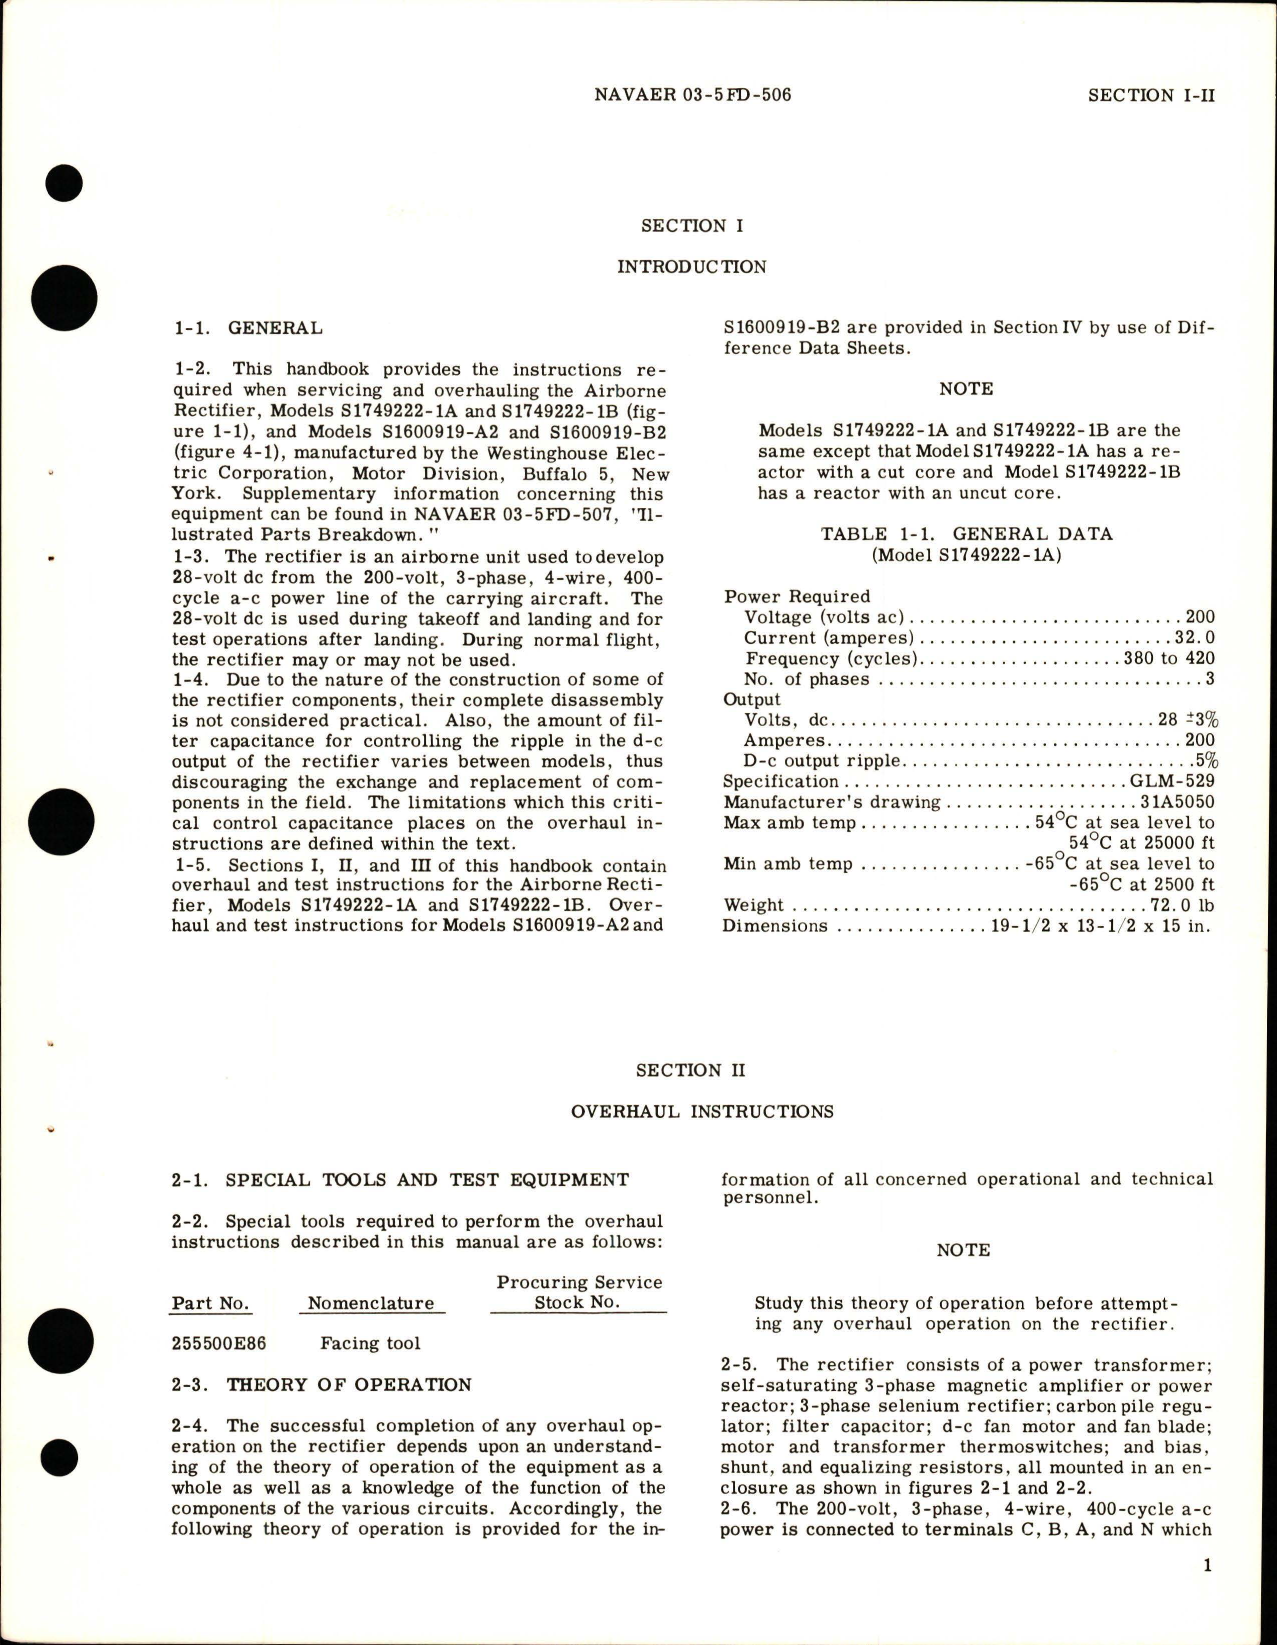 Sample page 7 from AirCorps Library document: Service and Overhaul Instructions for Airborne Rectifier - 